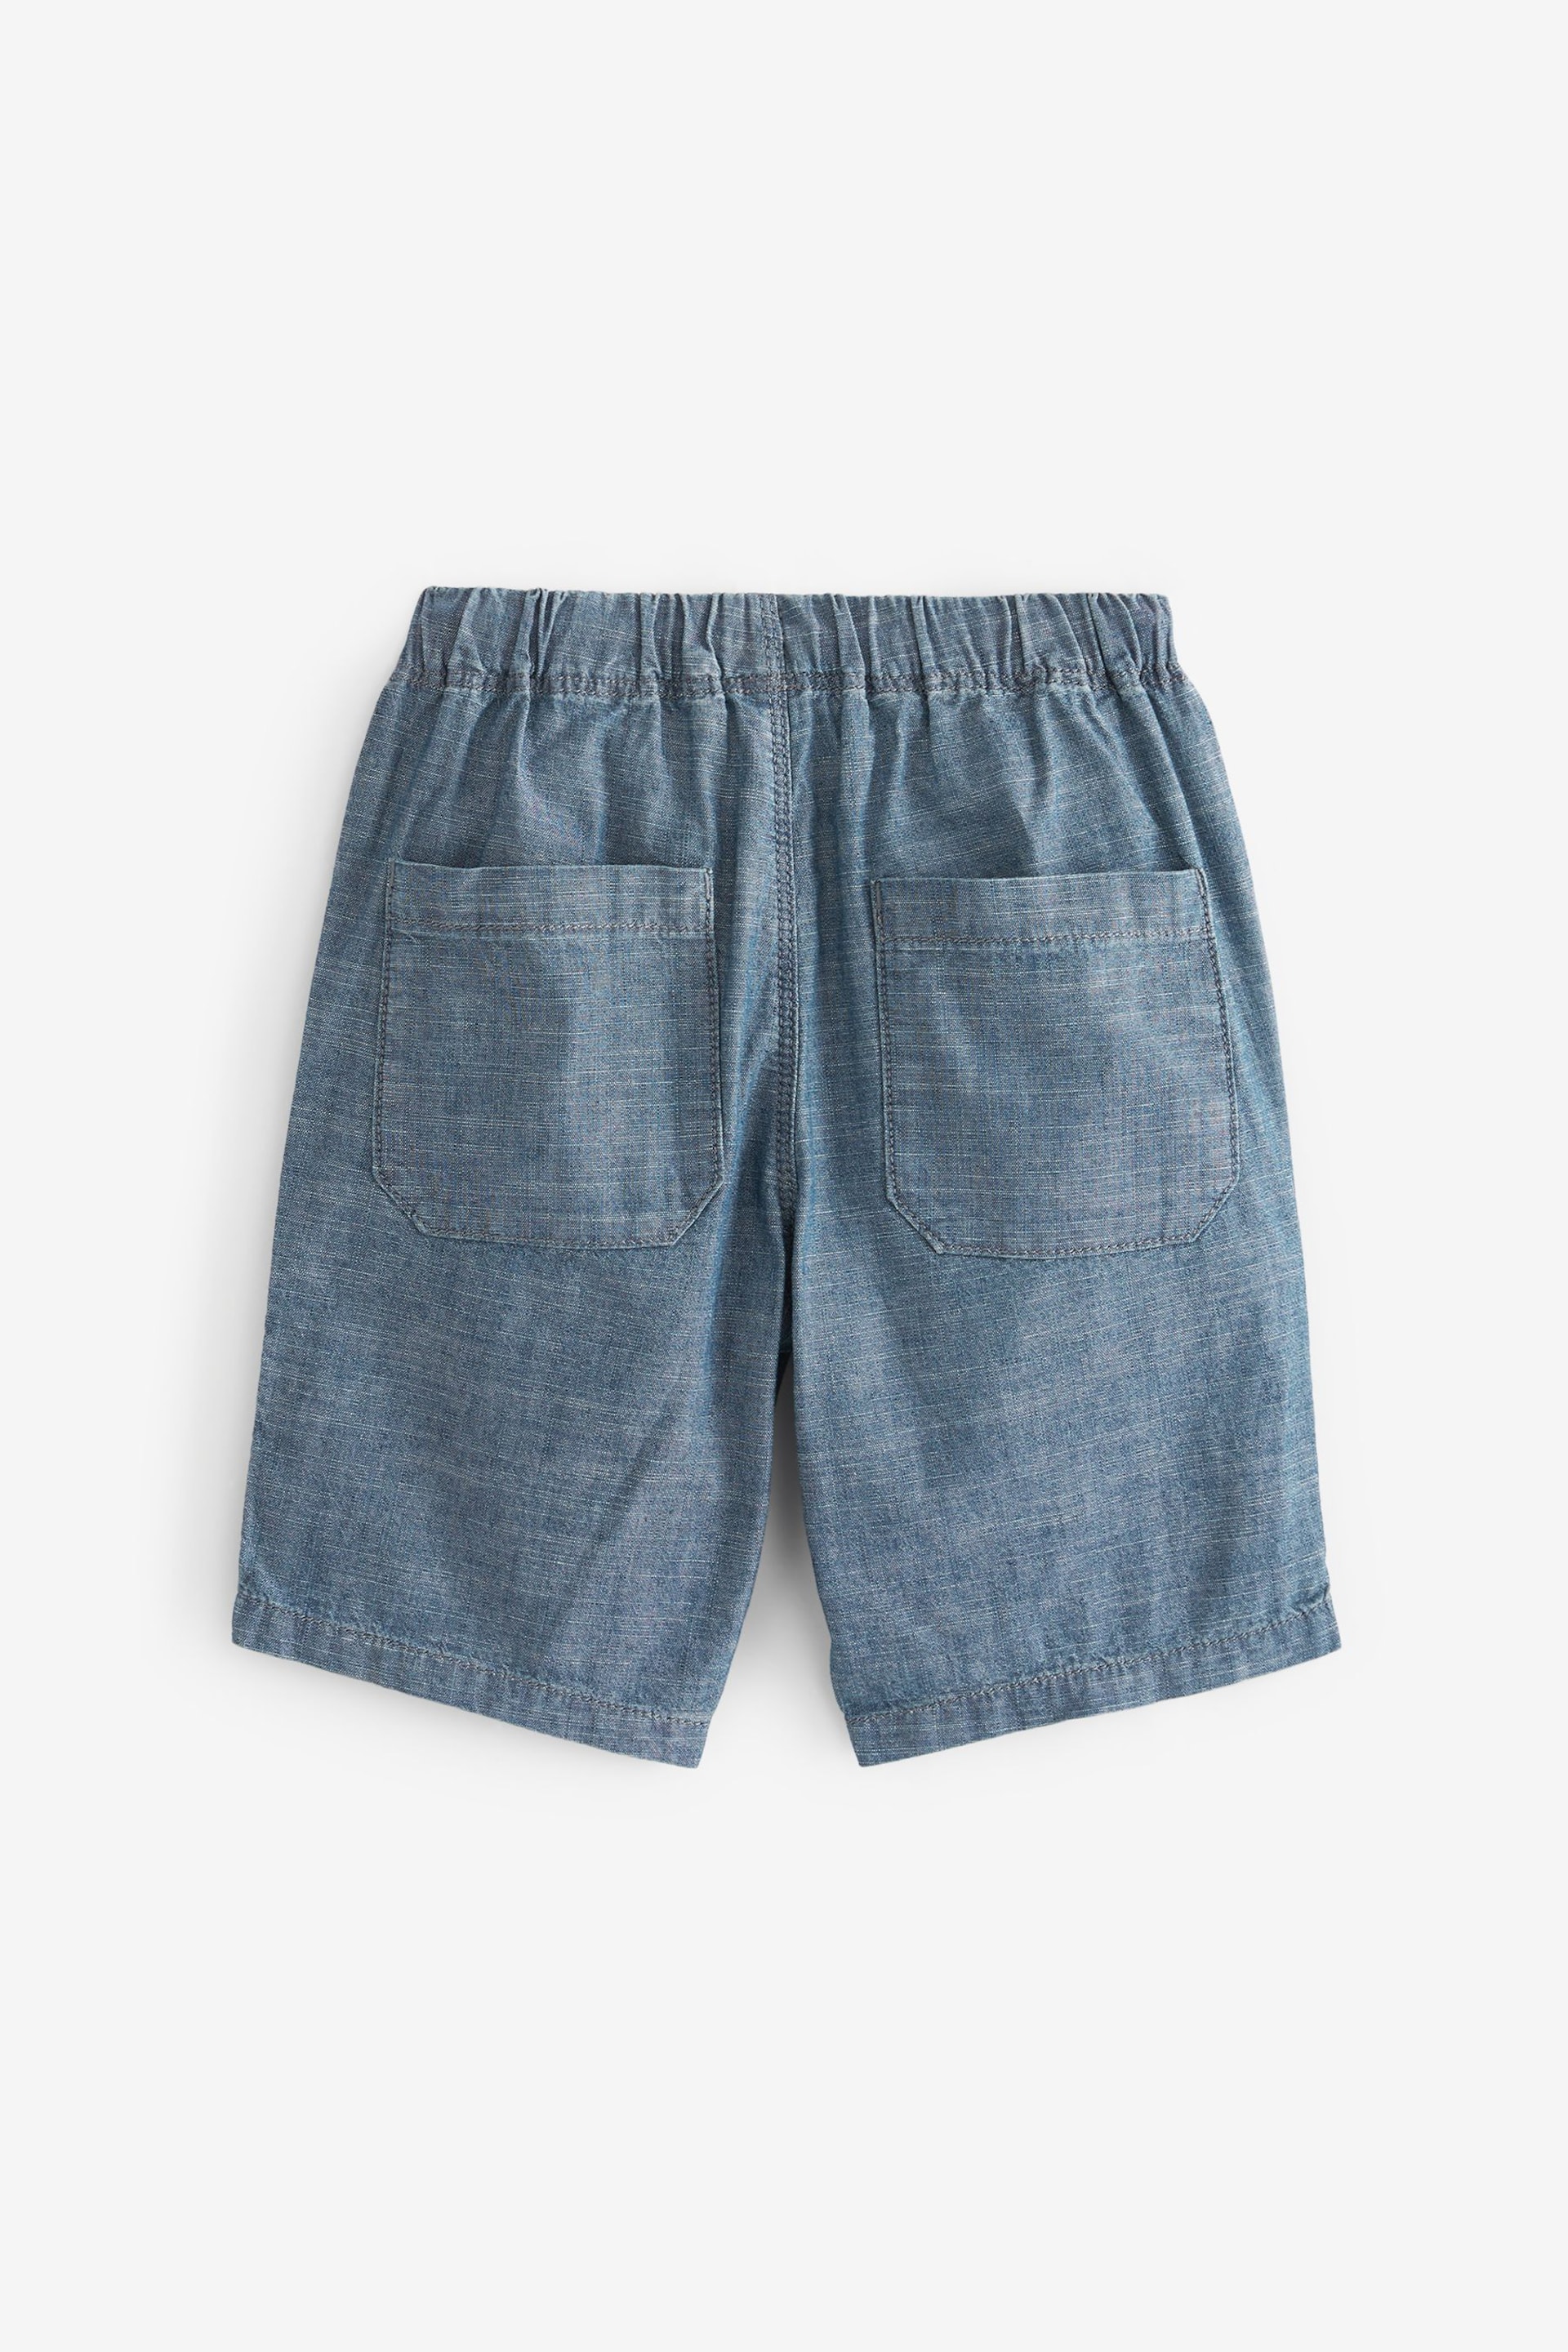 Blue Pull-On Shorts 3 Pack (3-16yrs) - Image 3 of 5